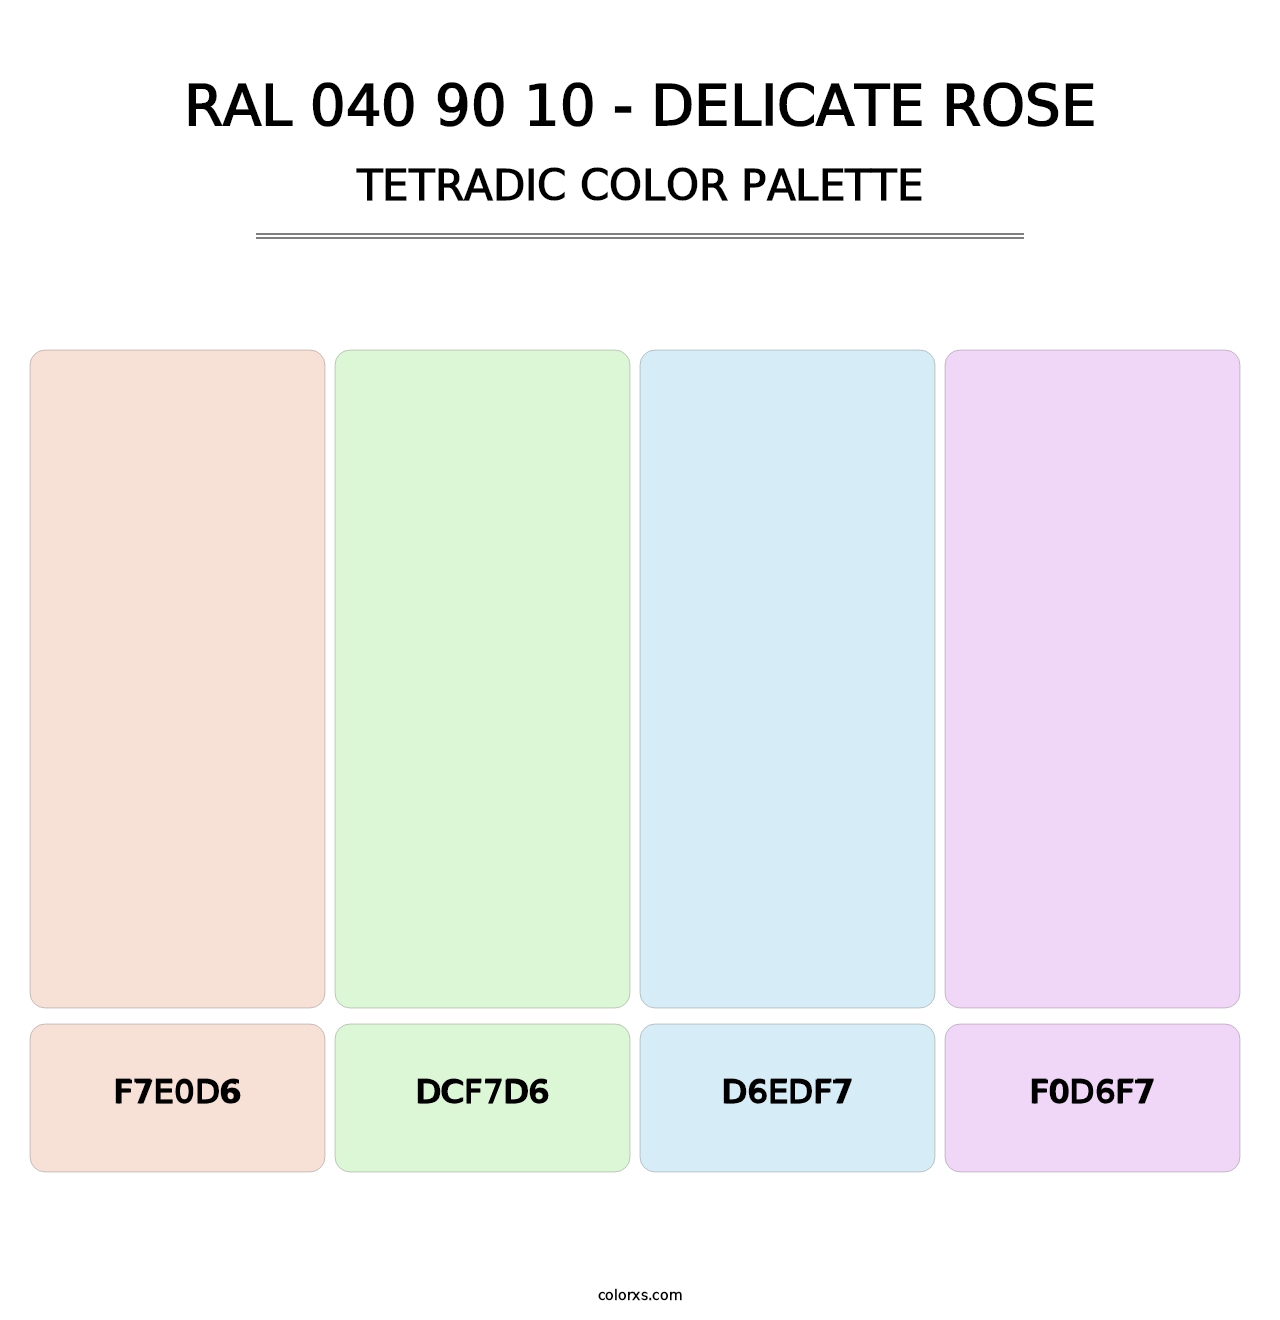 RAL 040 90 10 - Delicate Rose - Tetradic Color Palette